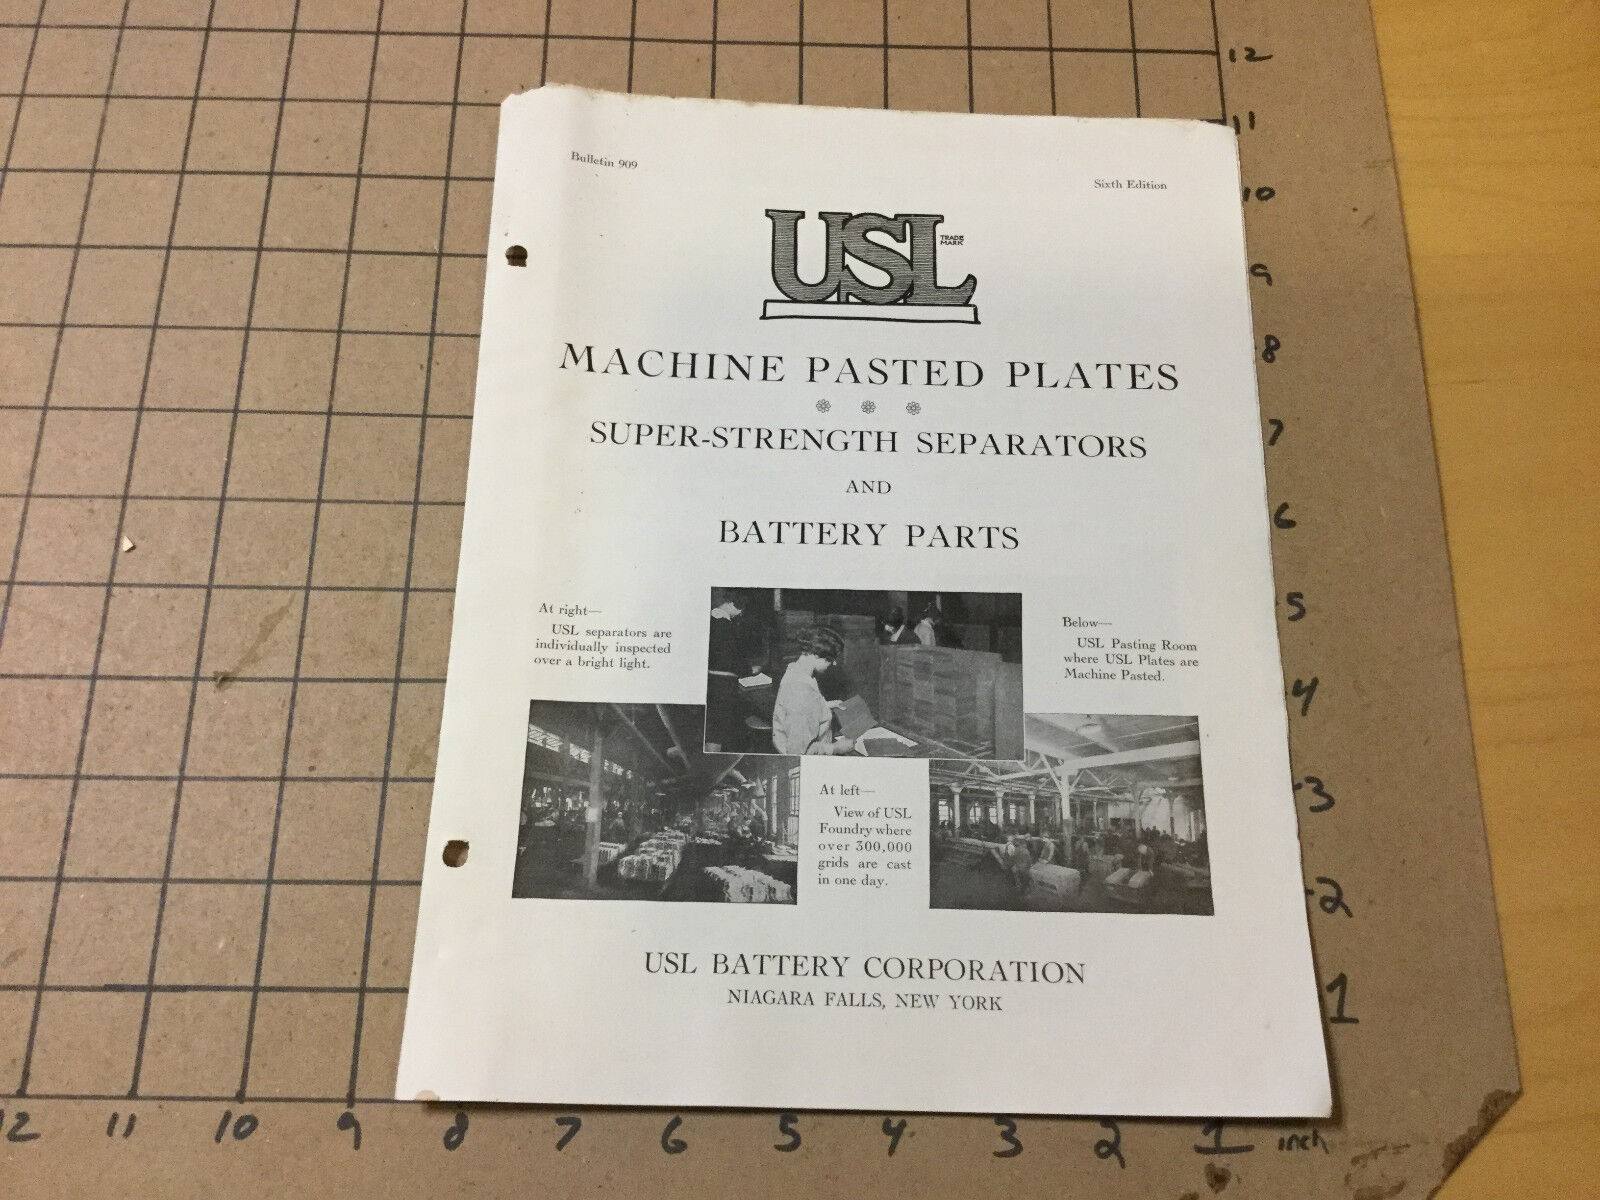 Original 1920's or so USL MACHINE PASTED PLATES 4pgs - 